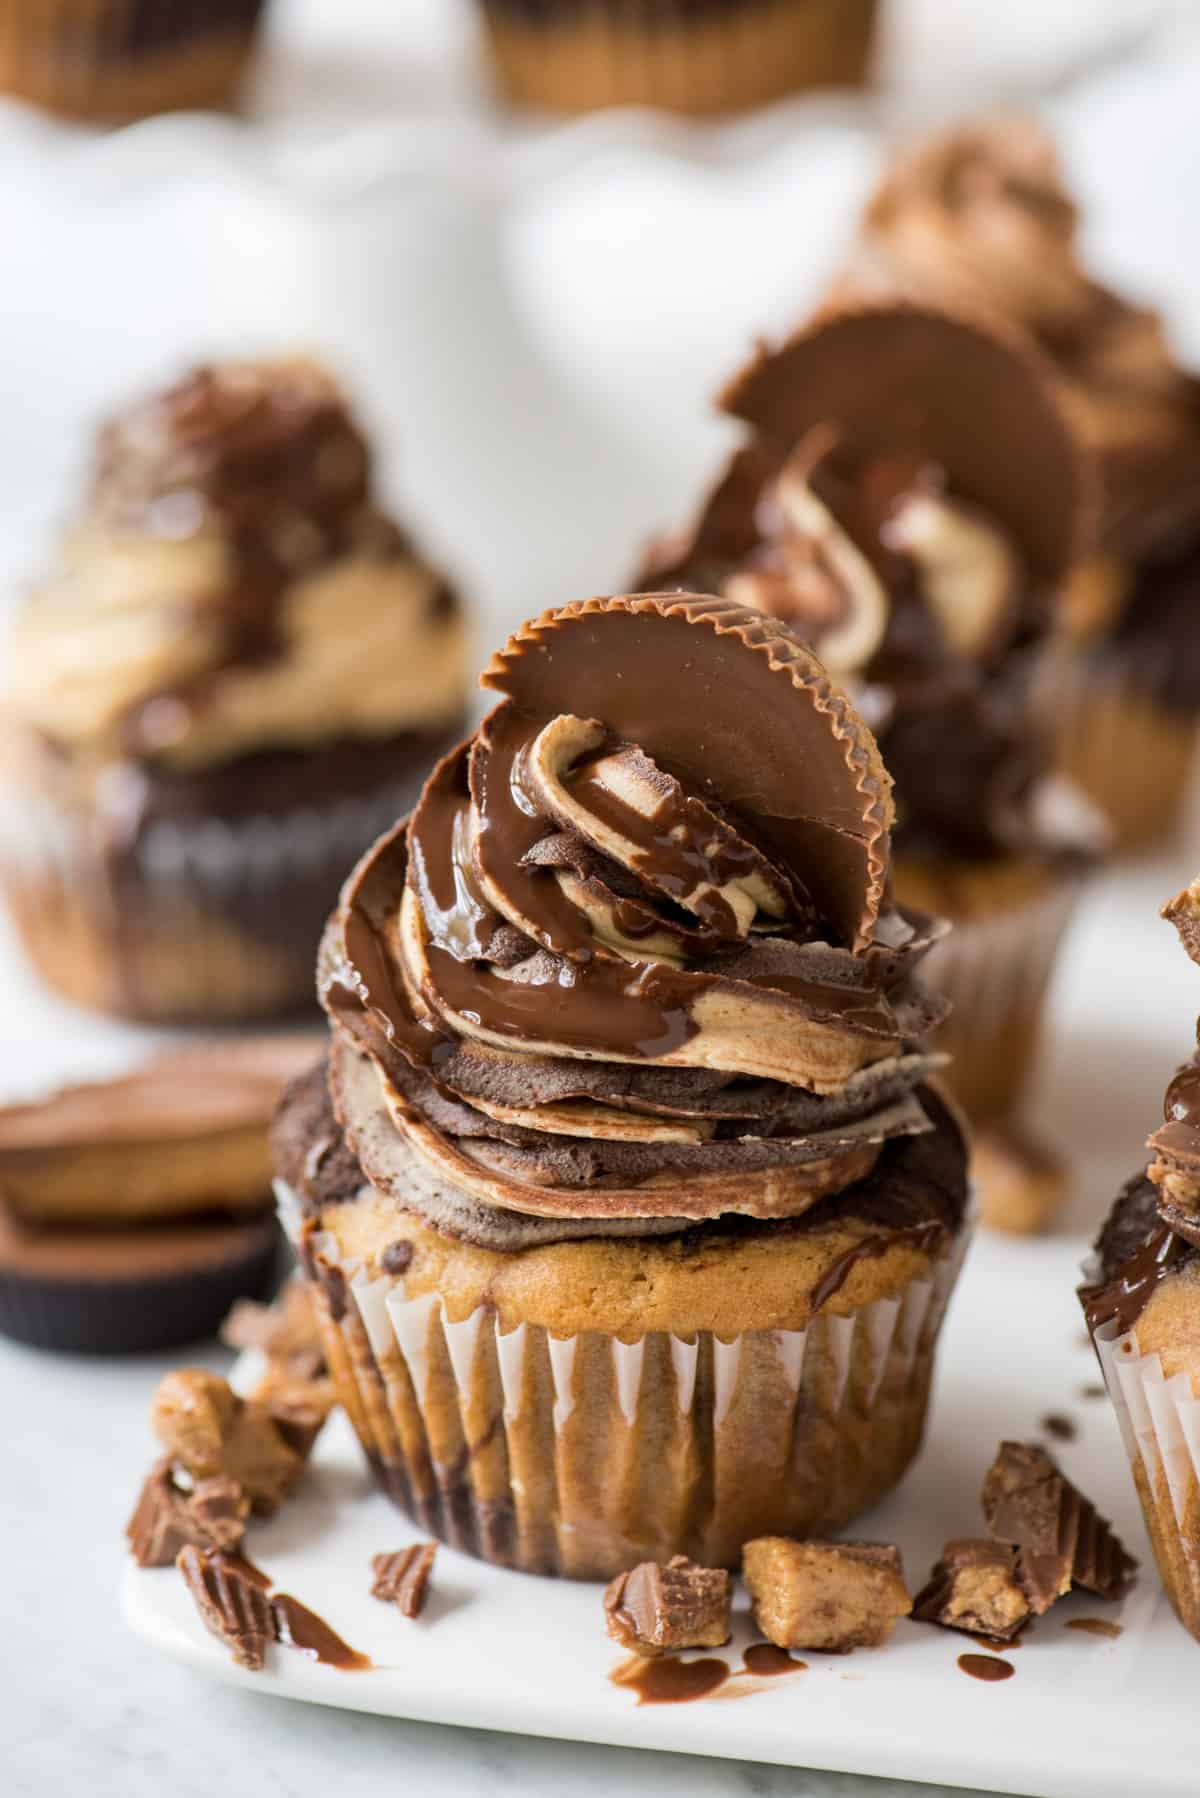 chocolate peanut butter cupcake with swirled chocolate peanut butter frosting topped with a reese’s cup and drizzled with chocolate sauce on white background